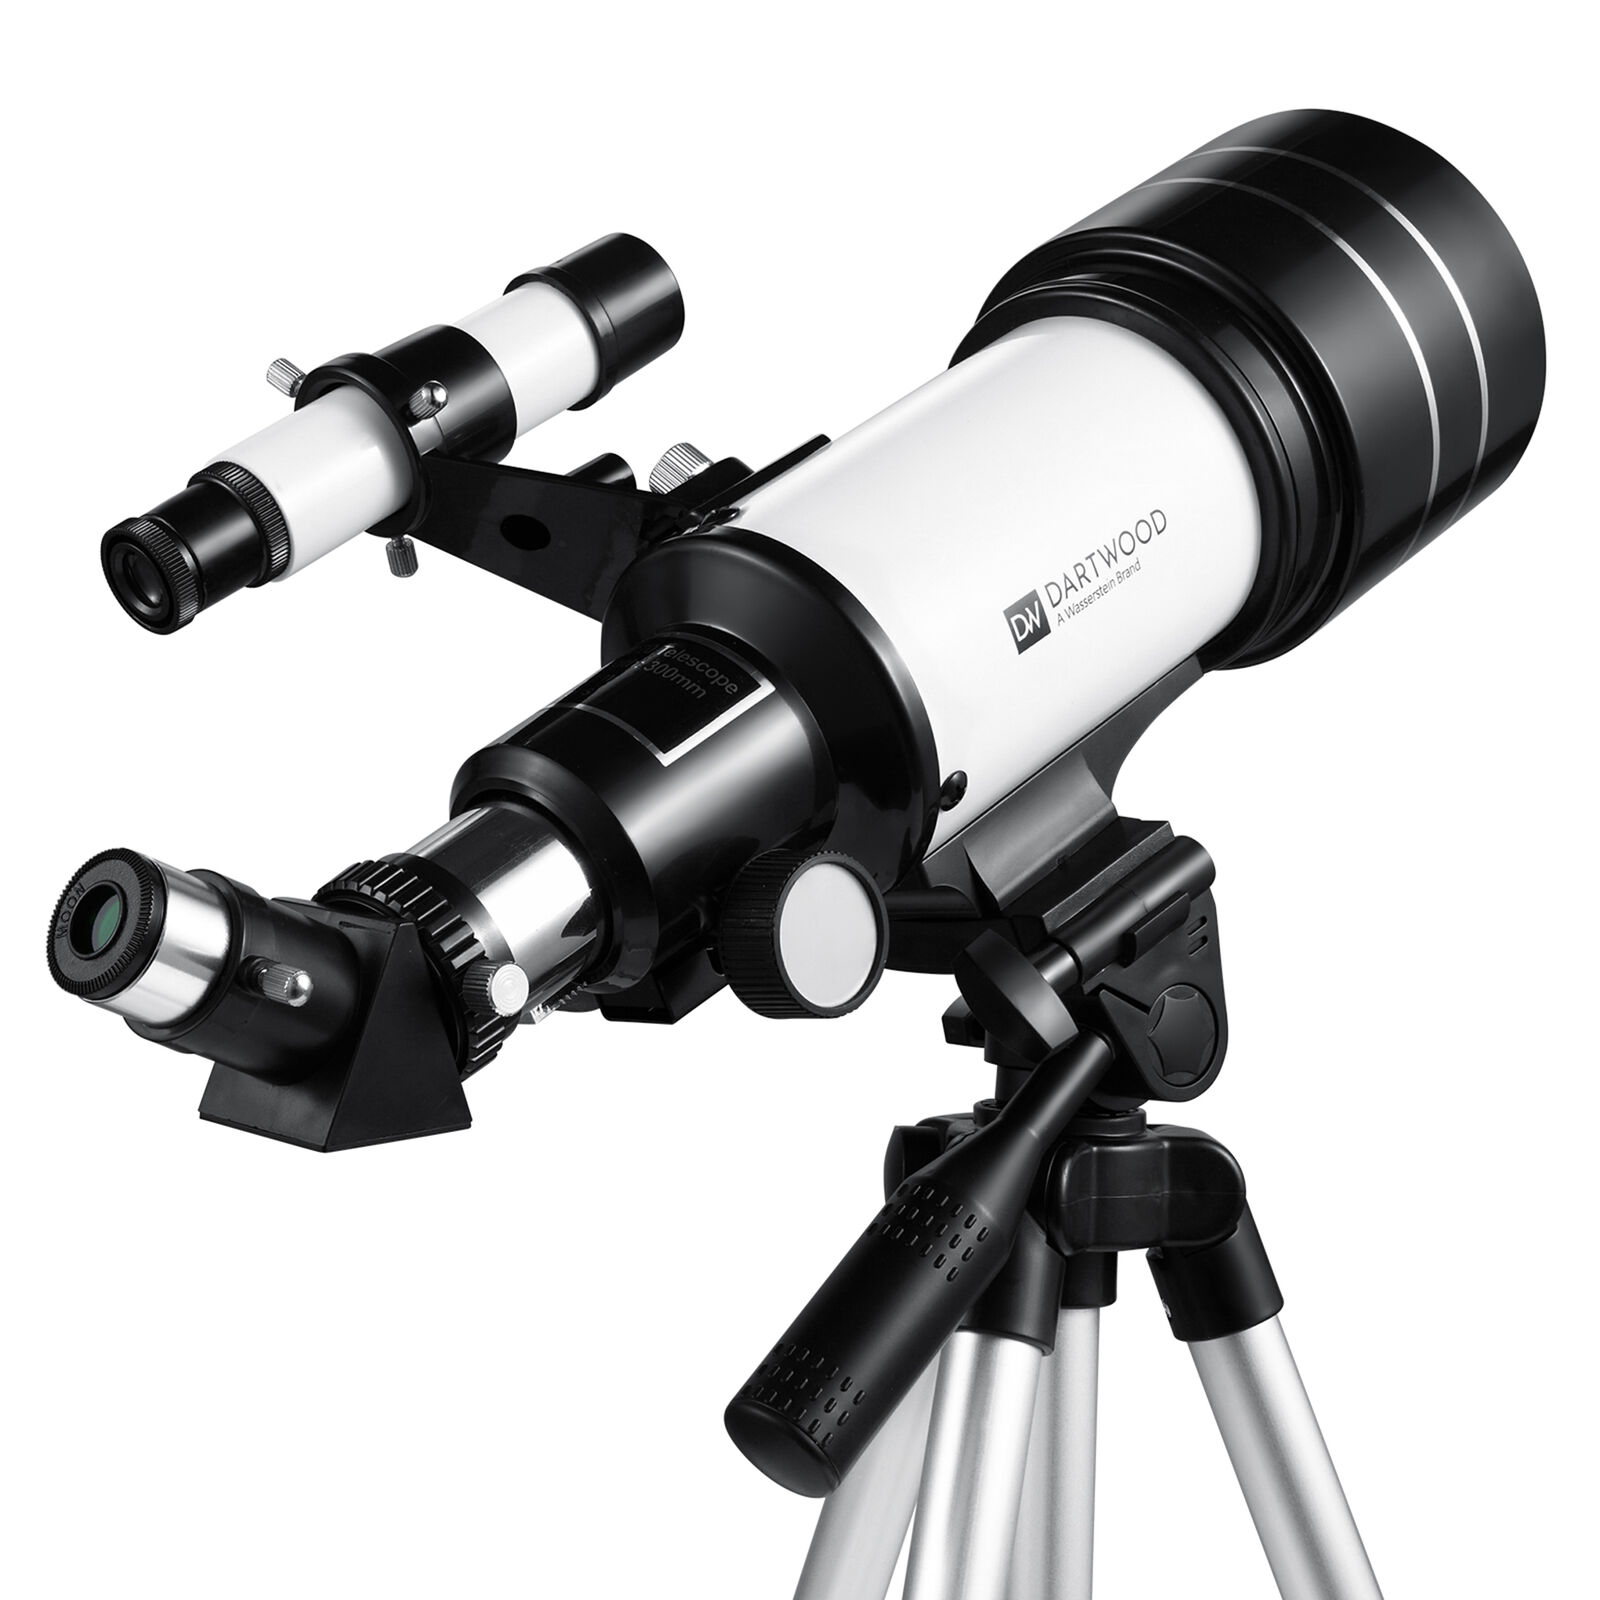 Dartwood Astronomical Telescope - 360° Rotational - Multiple Eyepieces Included